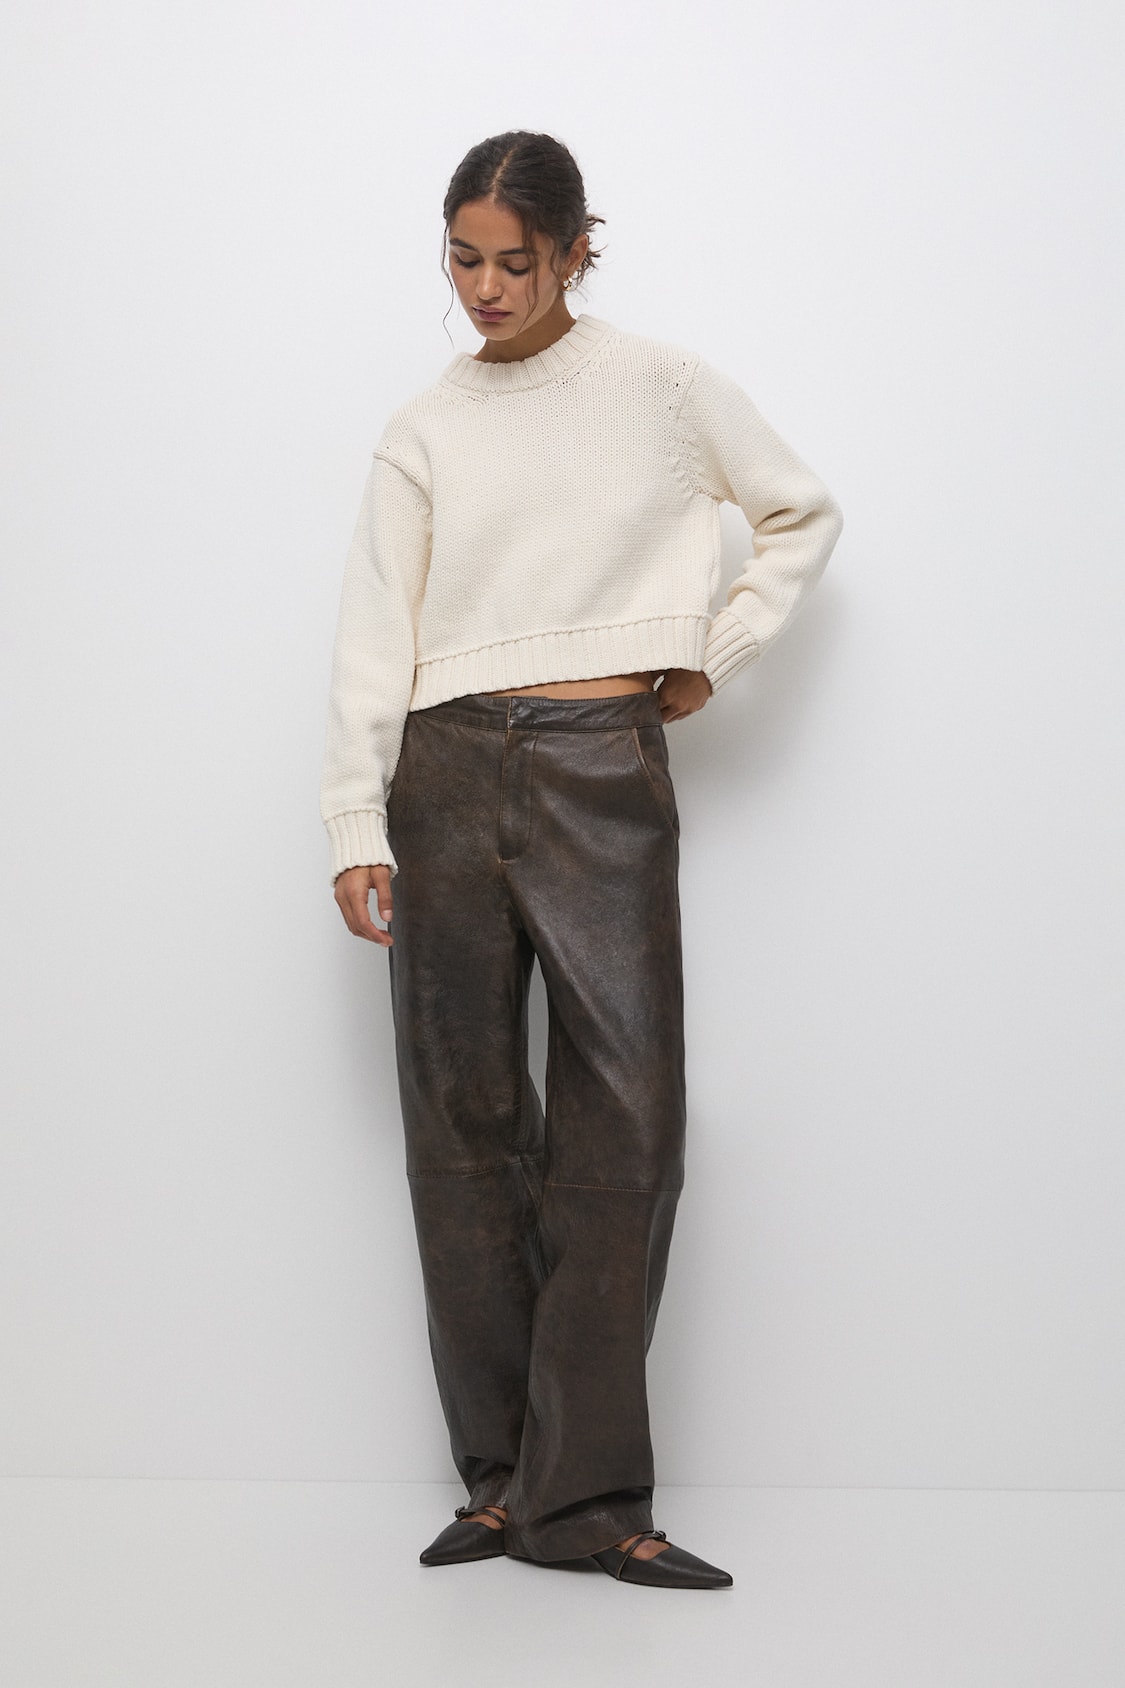 Knitted Jumpers To Wear With Wide Leg Trousers